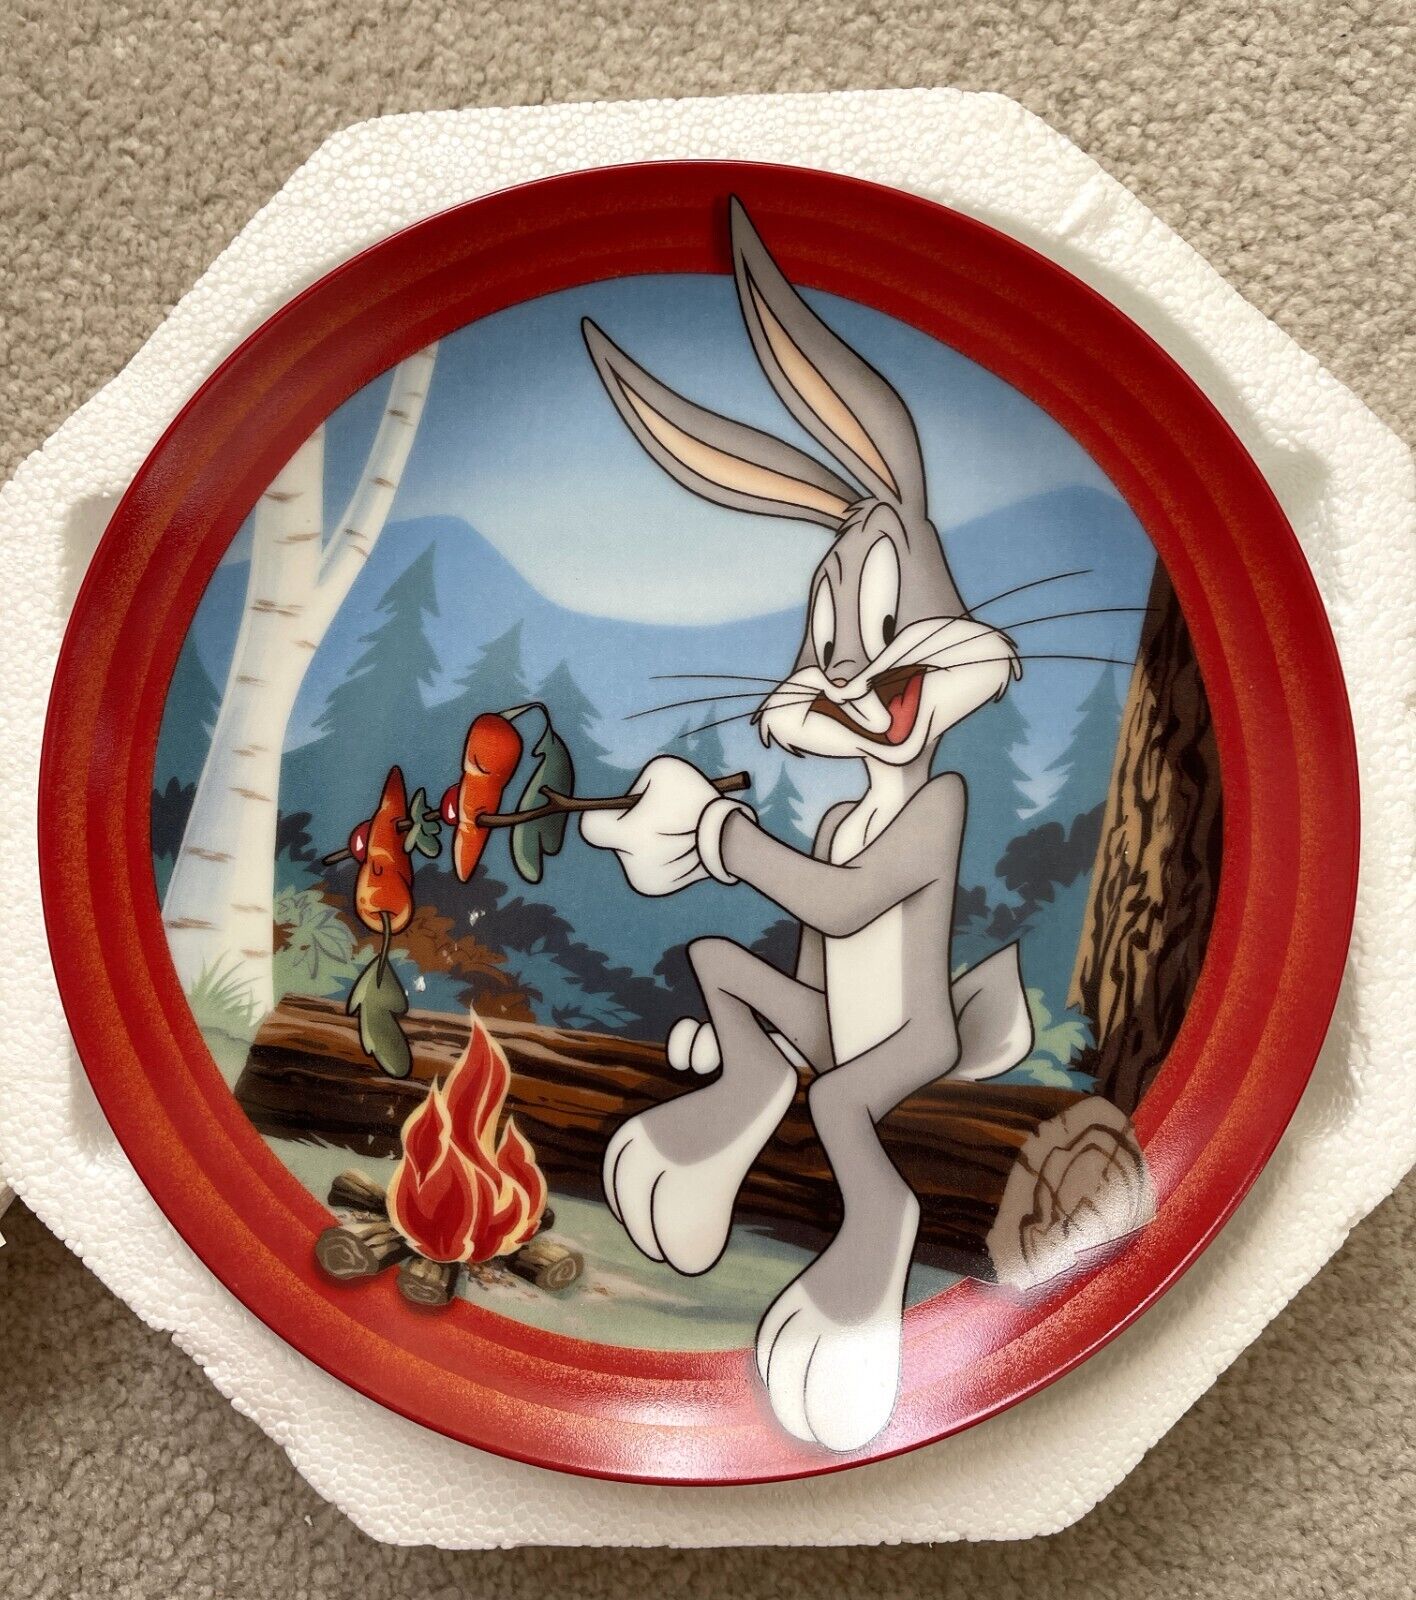 Bugs Bunny S’more The Merrier 1997 The Bradford Exchange Plate No. 465A New